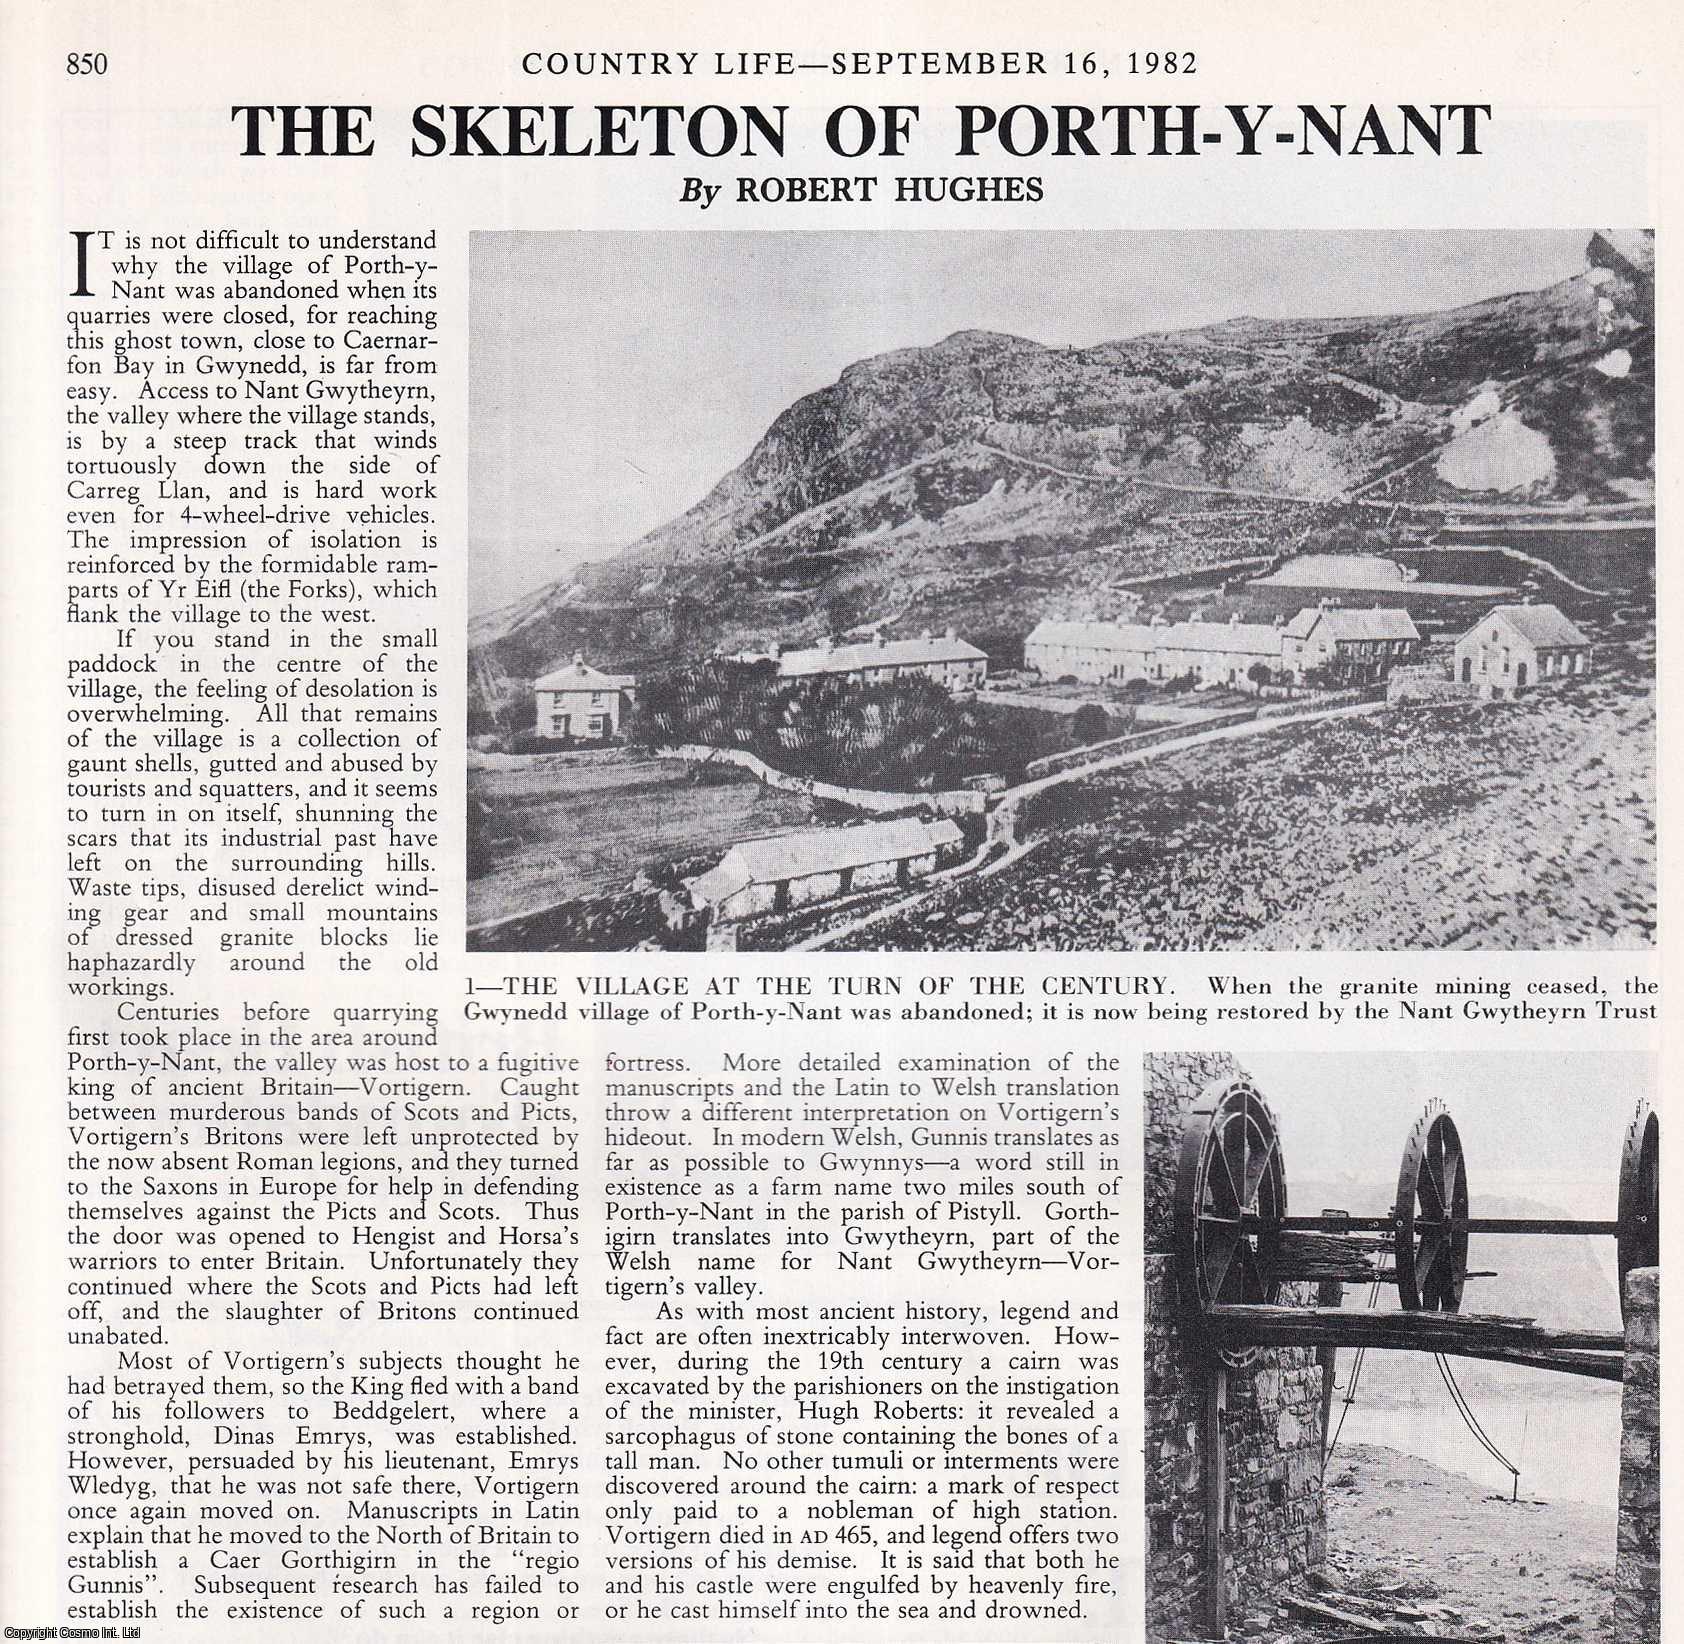 Robert Hughes - Porth-y-Nant, Gwynedd: The Restoration of an Abandoned Granite Mining Village. Several pictures and accompanying text, removed from an original issue of Country Life Magazine, 1982.